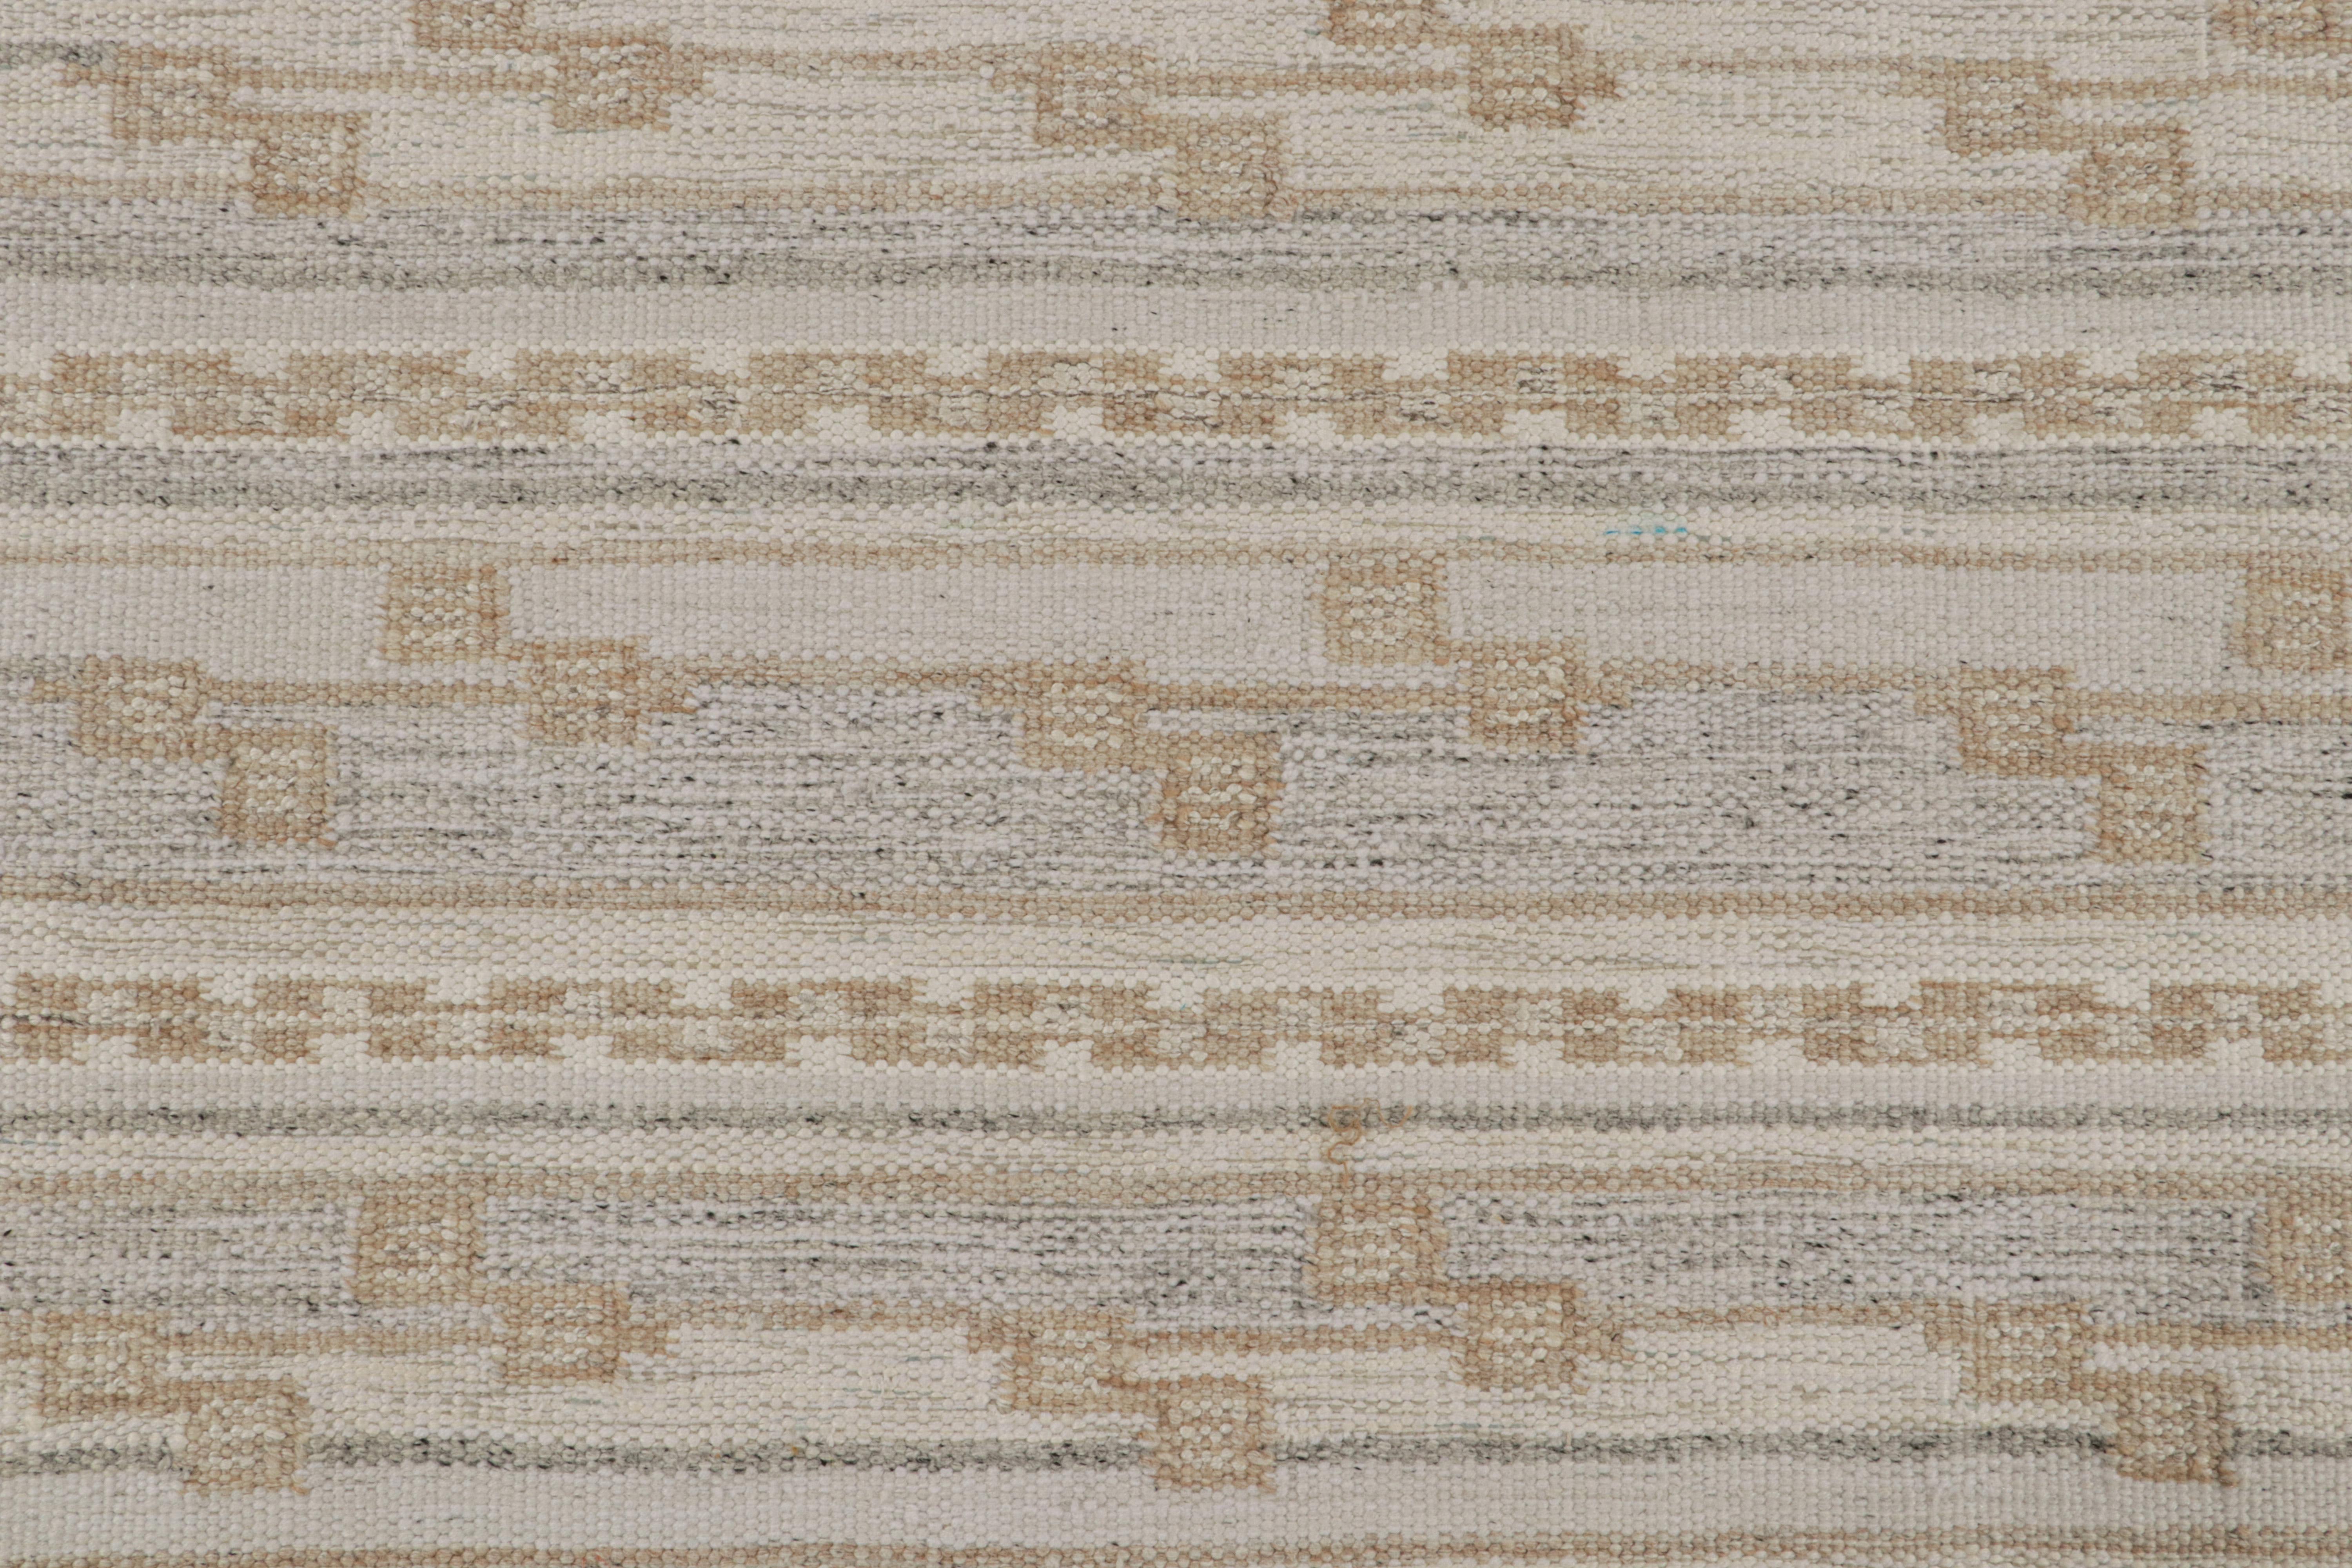 Rug & Kilim’s Scandinavian Style Kilim in Greige & Off White Patterns In New Condition For Sale In Long Island City, NY